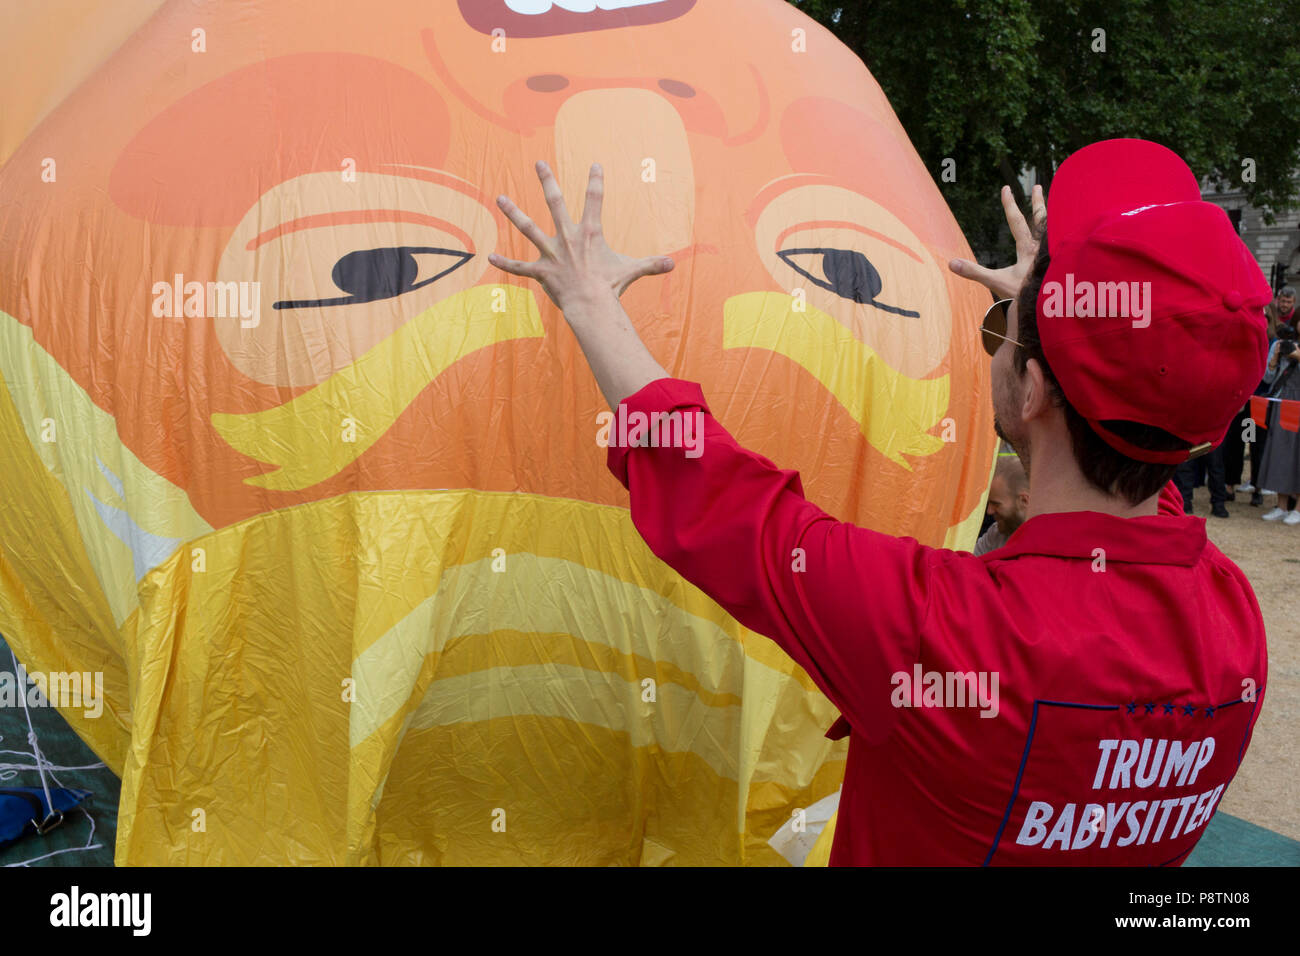 London, UK. 13th July, 2018. The inflatable balloon called Baby Trump is almost readt to fly above Parliament Square in Westminster, the seat of the UK Parliament, during the US President's visit to the UK. Baby Trump is a 20ft high orange blimp depicting the US President as an enraged, smartphone-clutching infant - and given special permission to appear above the capital by London Mayor Sadiq Khan because of its protest rather than artistic nature. It is the brainchild of Graphic designer Matt Bonner. Credit: RichardBaker/Alamy Live News Stock Photo